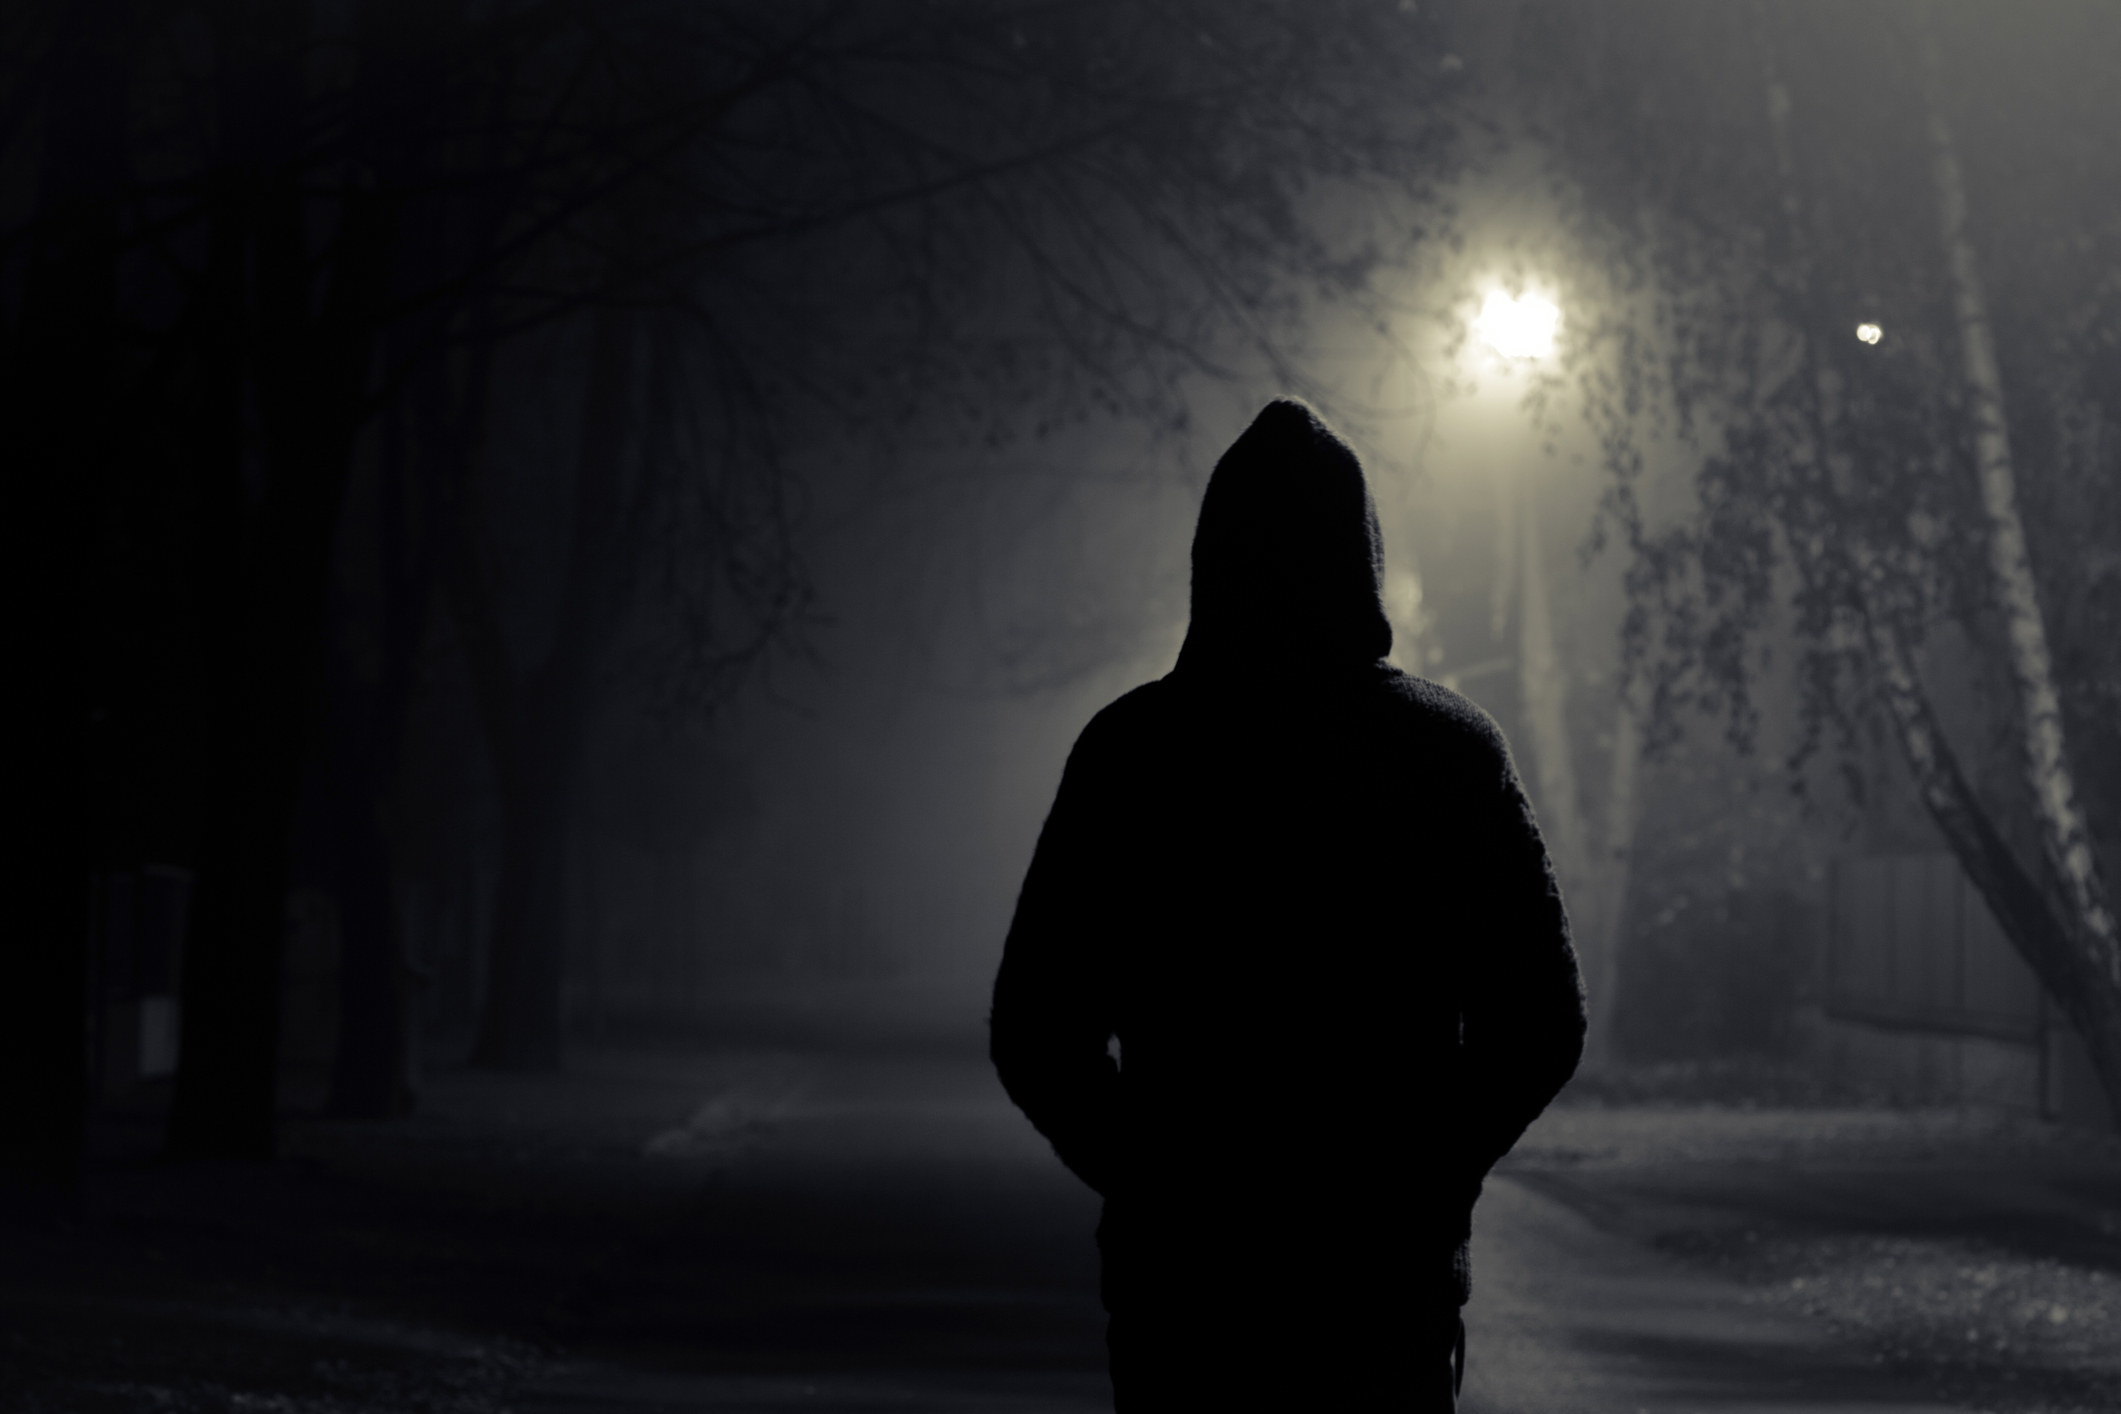 A mysterious person wearing a hoodie and walking at night